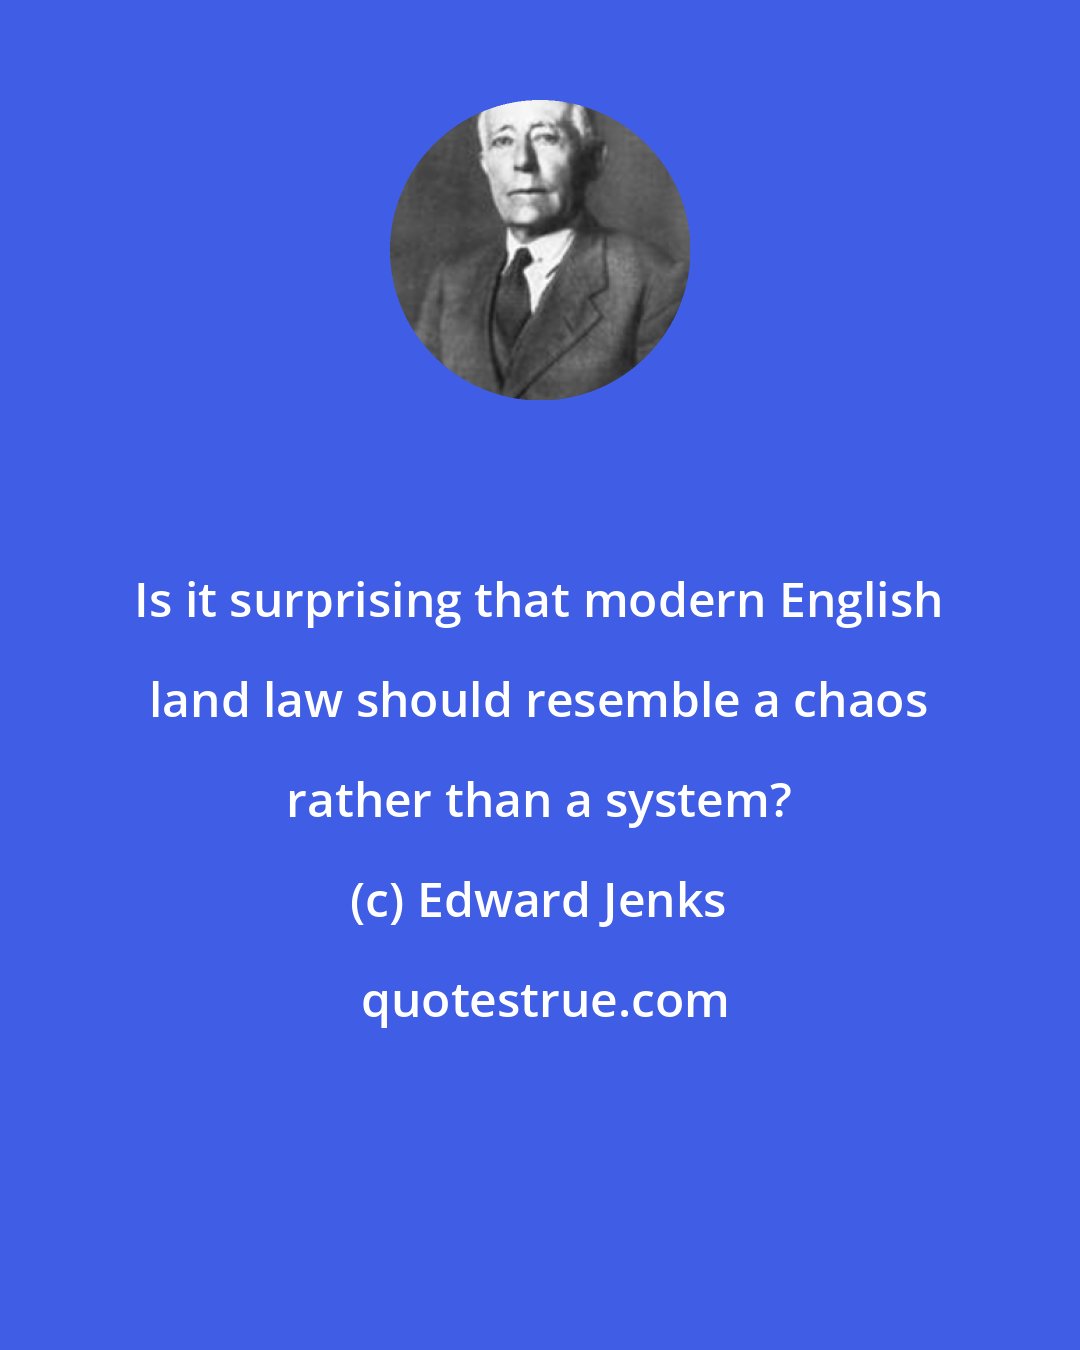 Edward Jenks: Is it surprising that modern English land law should resemble a chaos rather than a system?